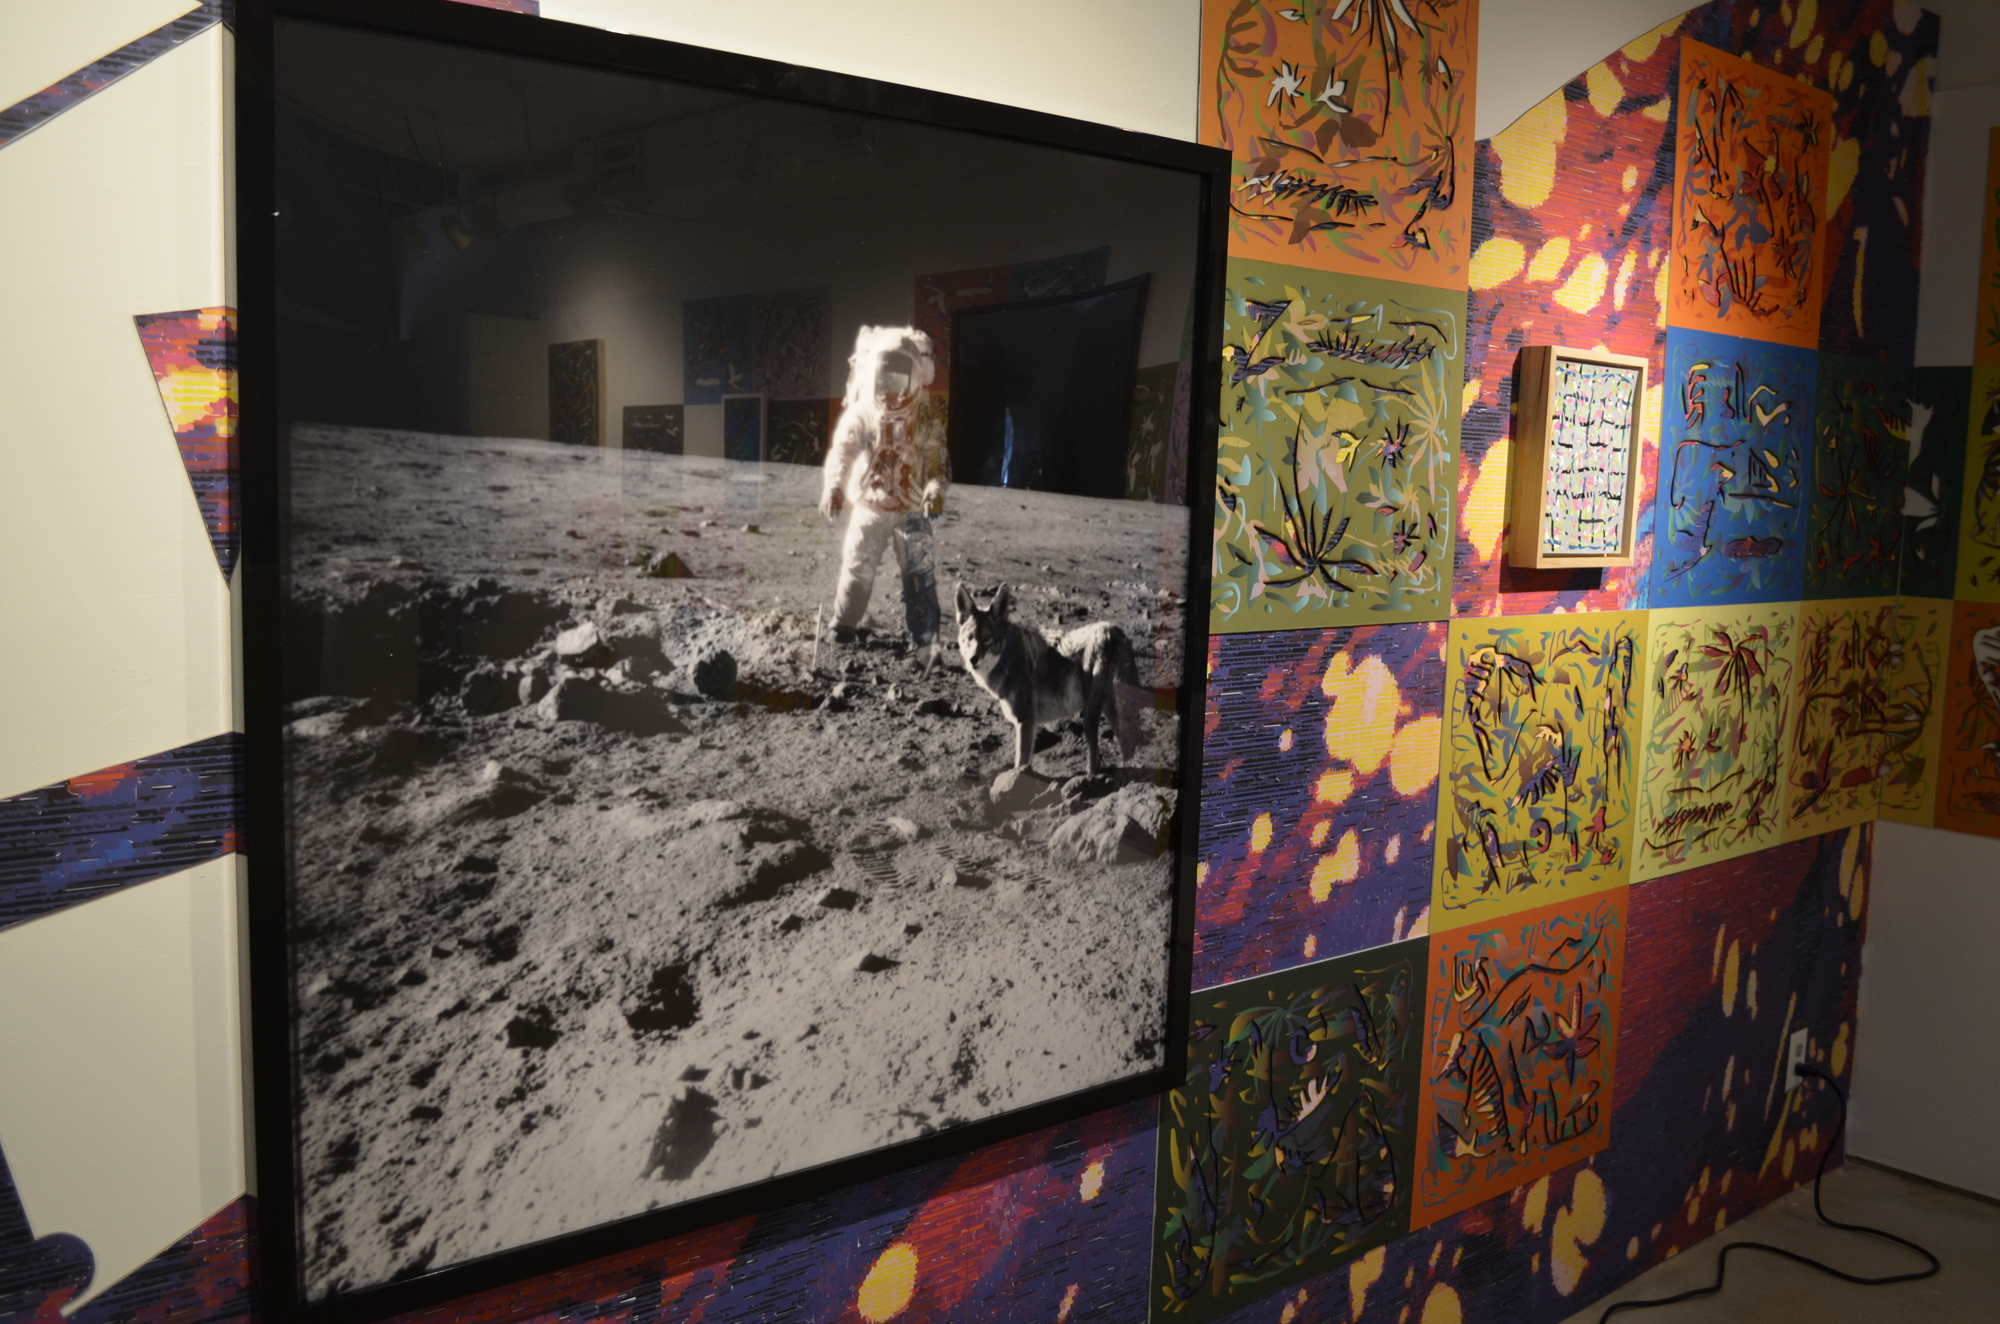 Shawn Petterson's work focuses on outer space as a hopeful frontier. 